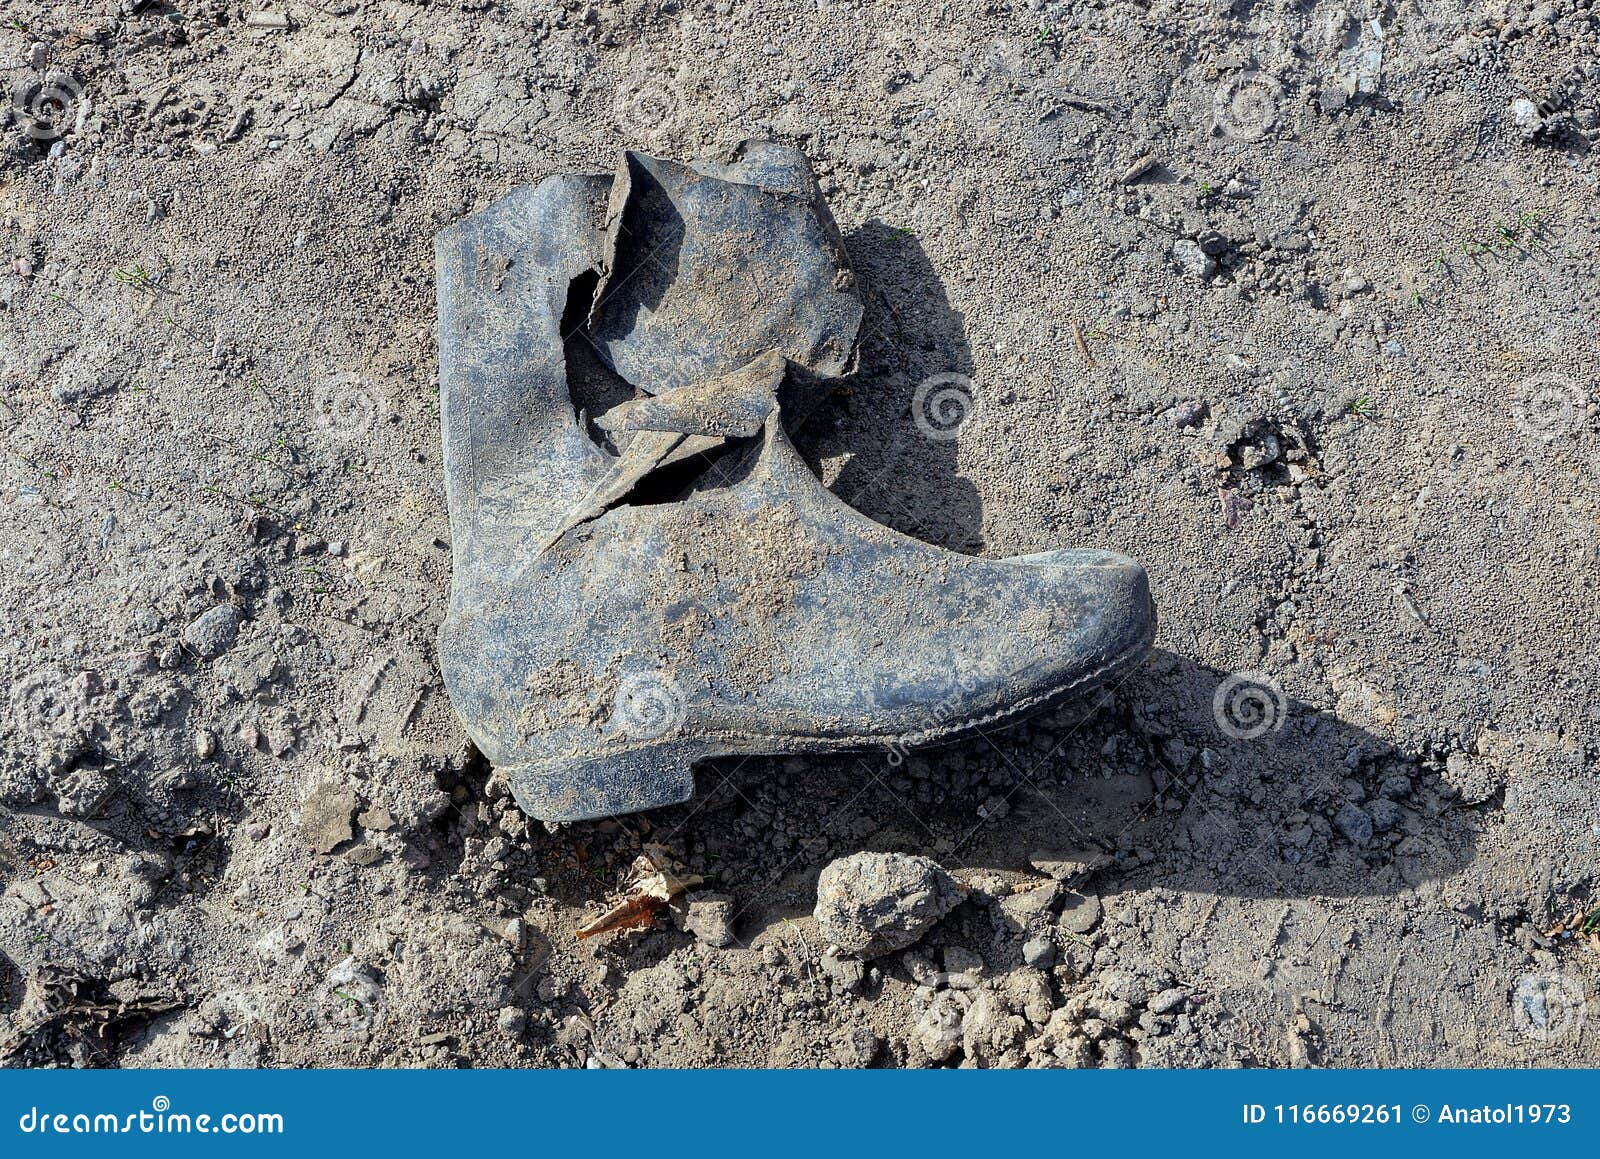 Dirty Ragged Rubber Boot on the Ground Stock Image - Image of rough ...